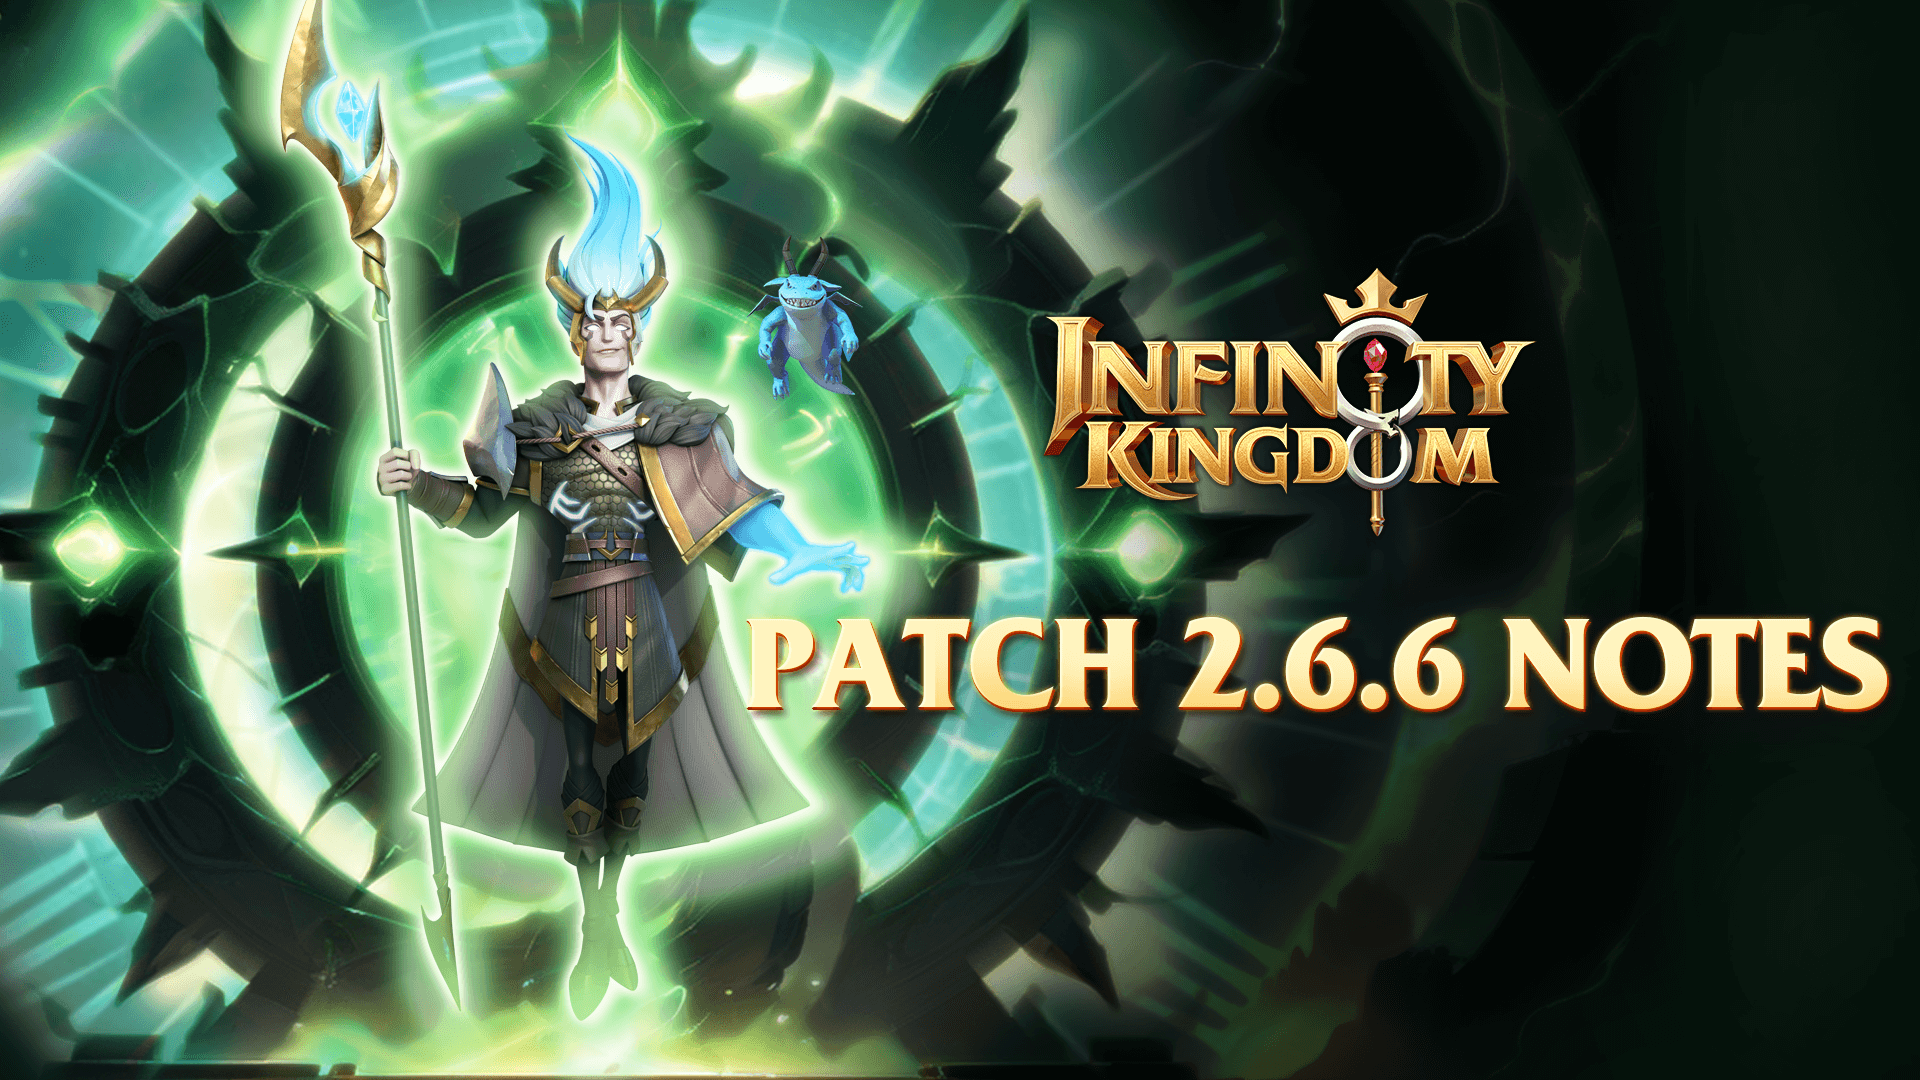 2.6.6 Patch Notes